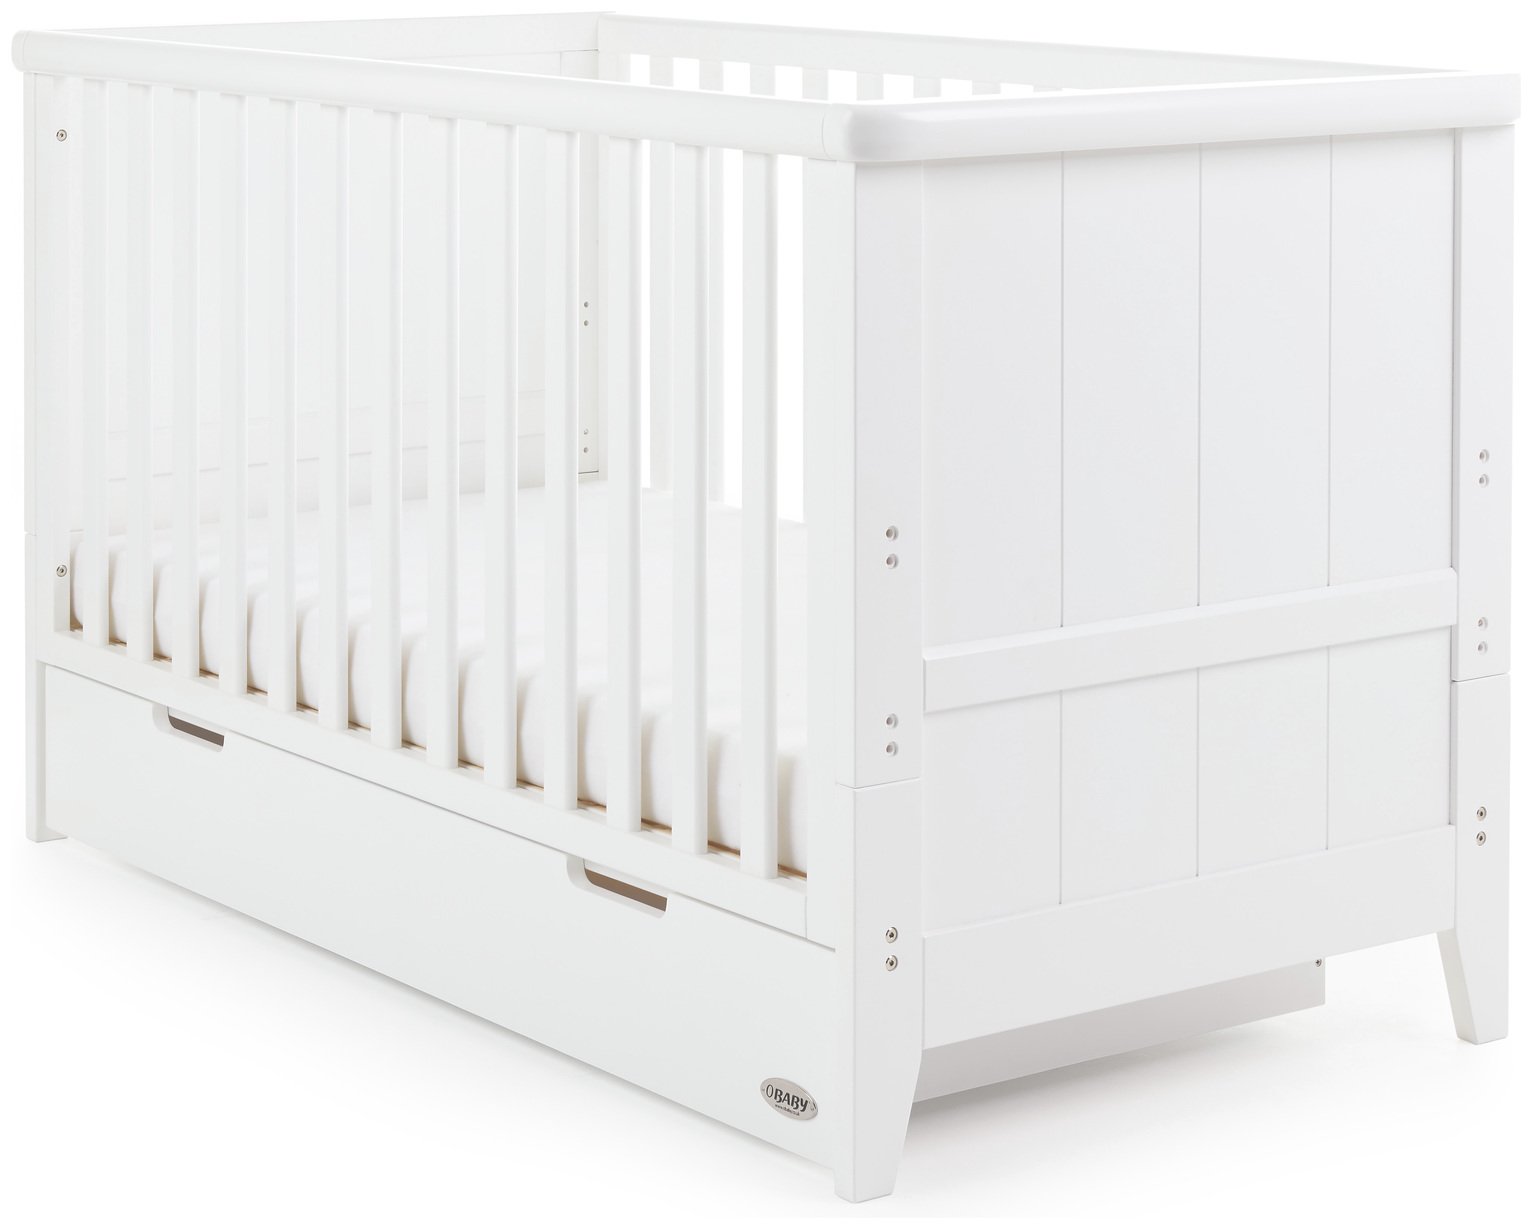 Obaby Belton Cot Bed Review